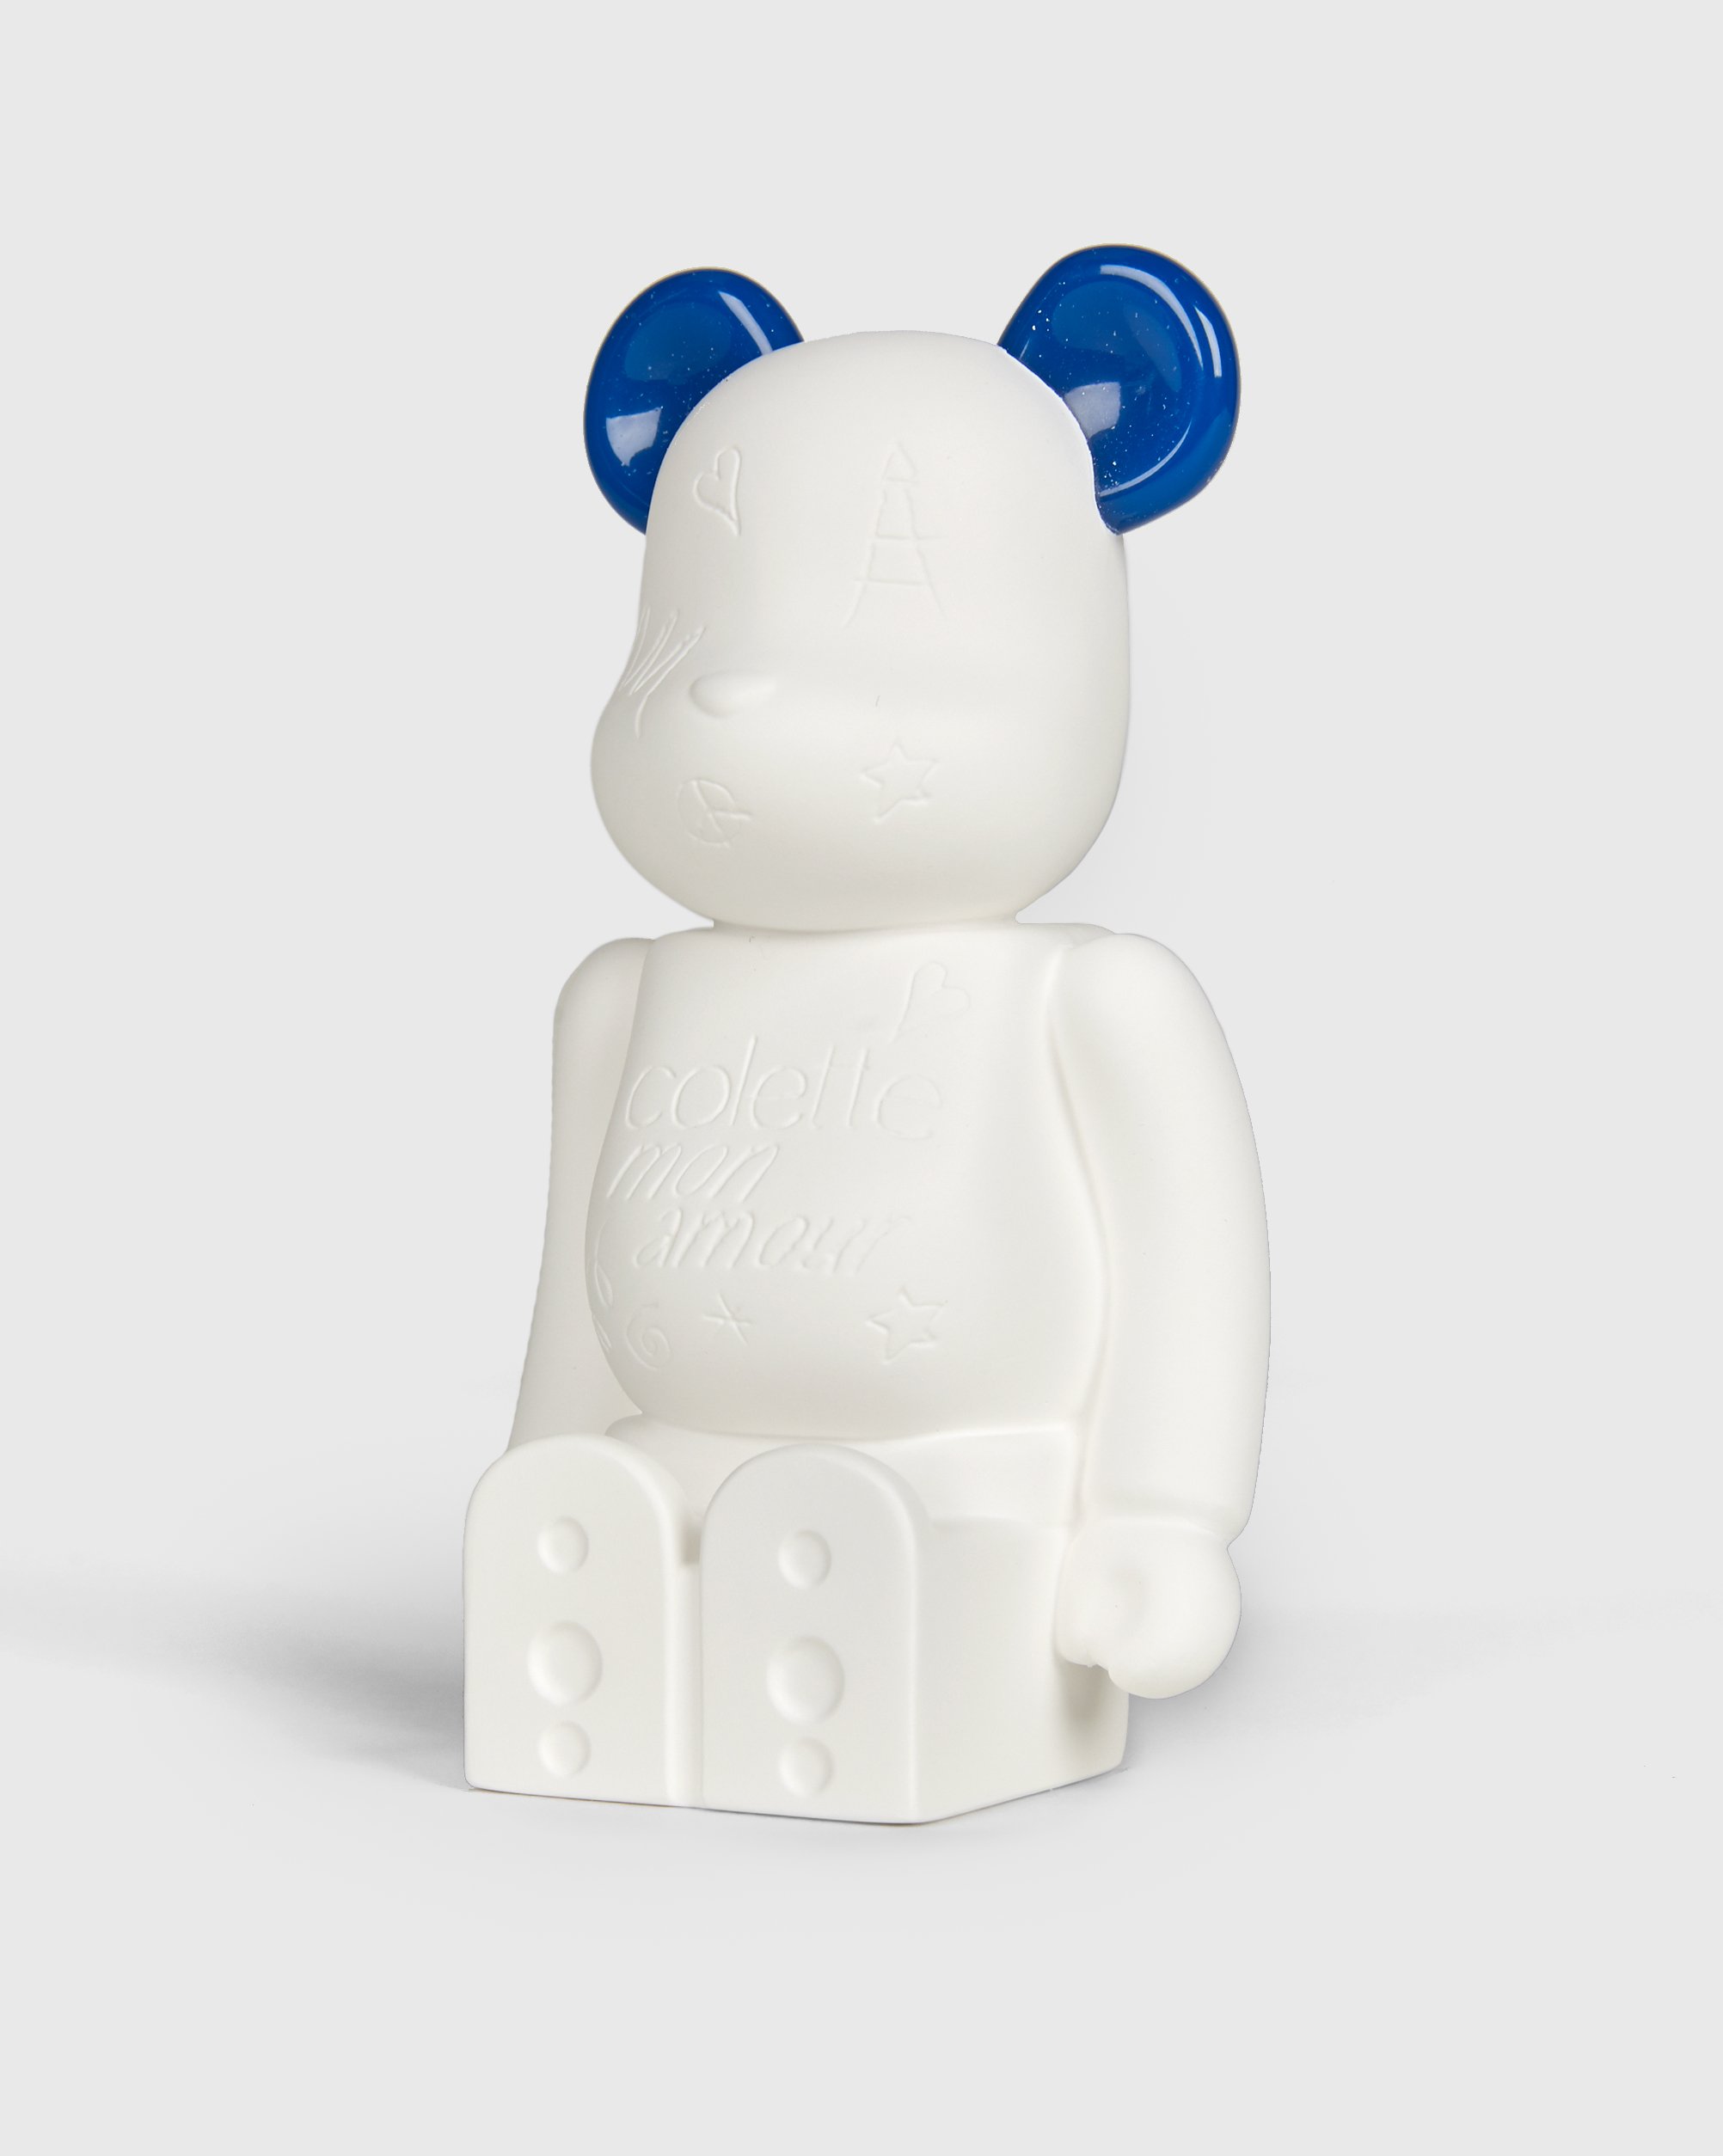 Colette Mon Amour - Be@rbrick Aroma Ornament - Lifestyle - White - Image 1